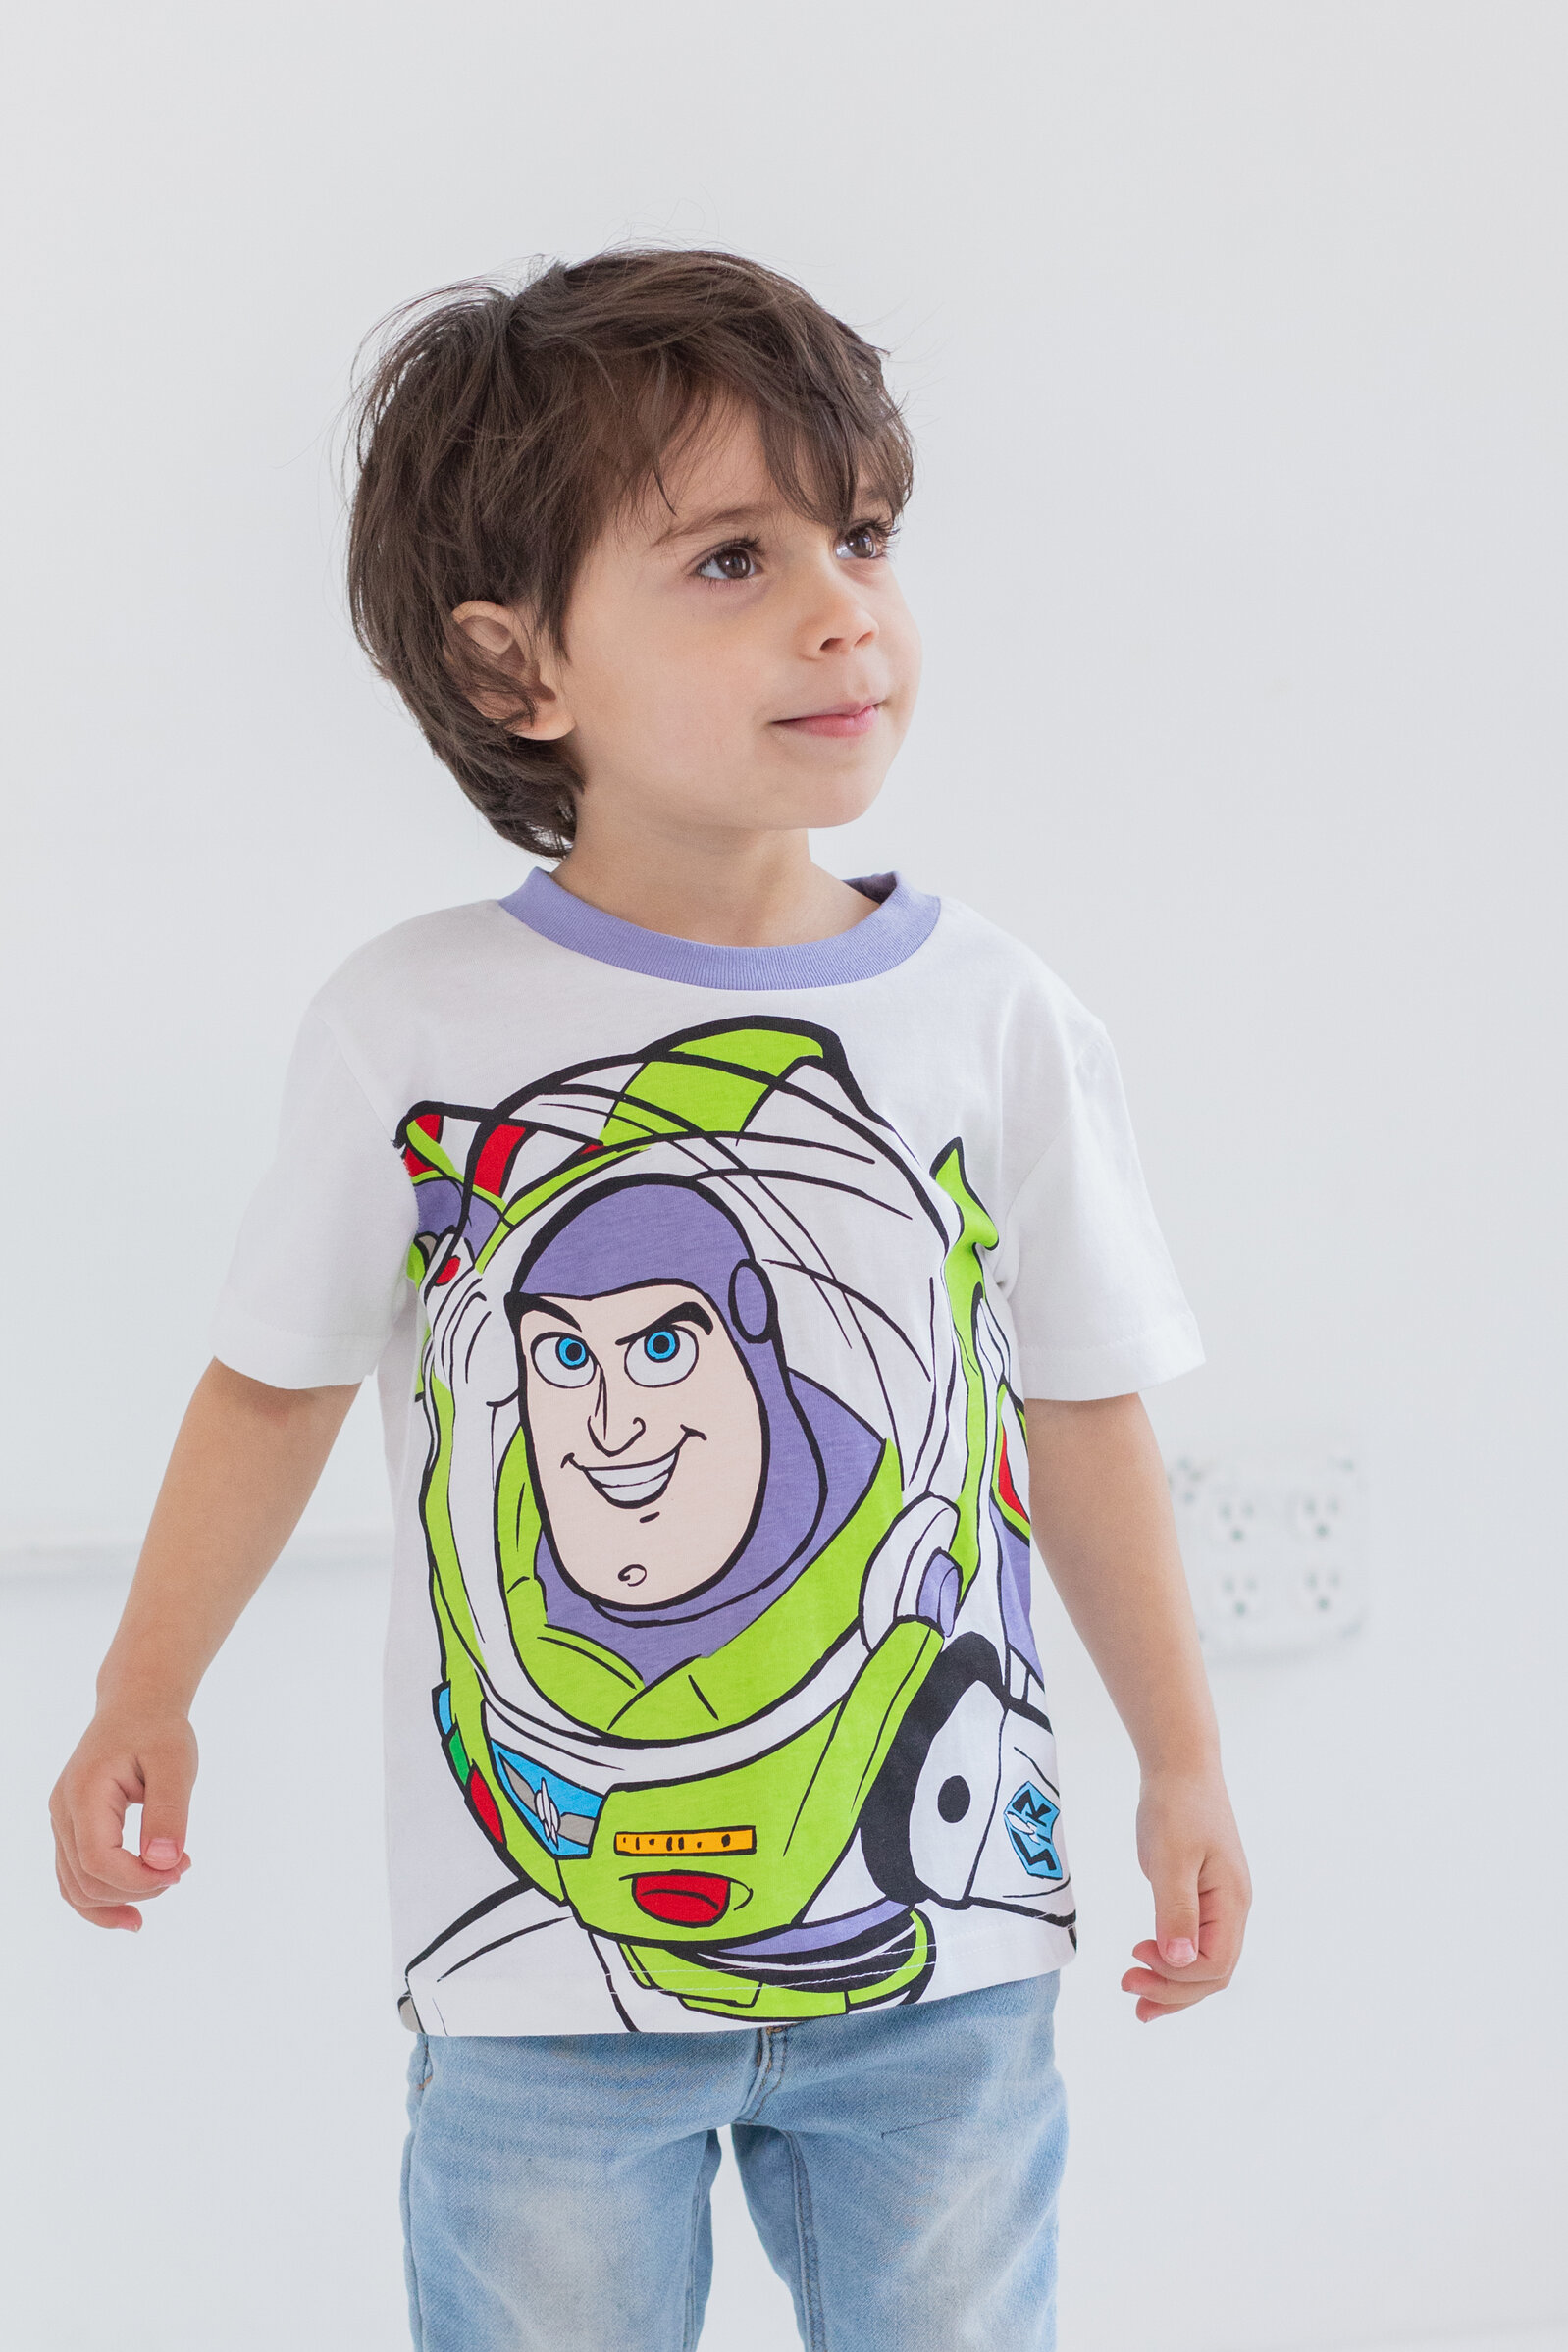 Disney Pixar Toy Story Woody Buzz Lightyear Rex Little Boys 3 Pack T-Shirts Toddler to Big Kid - image 2 of 5